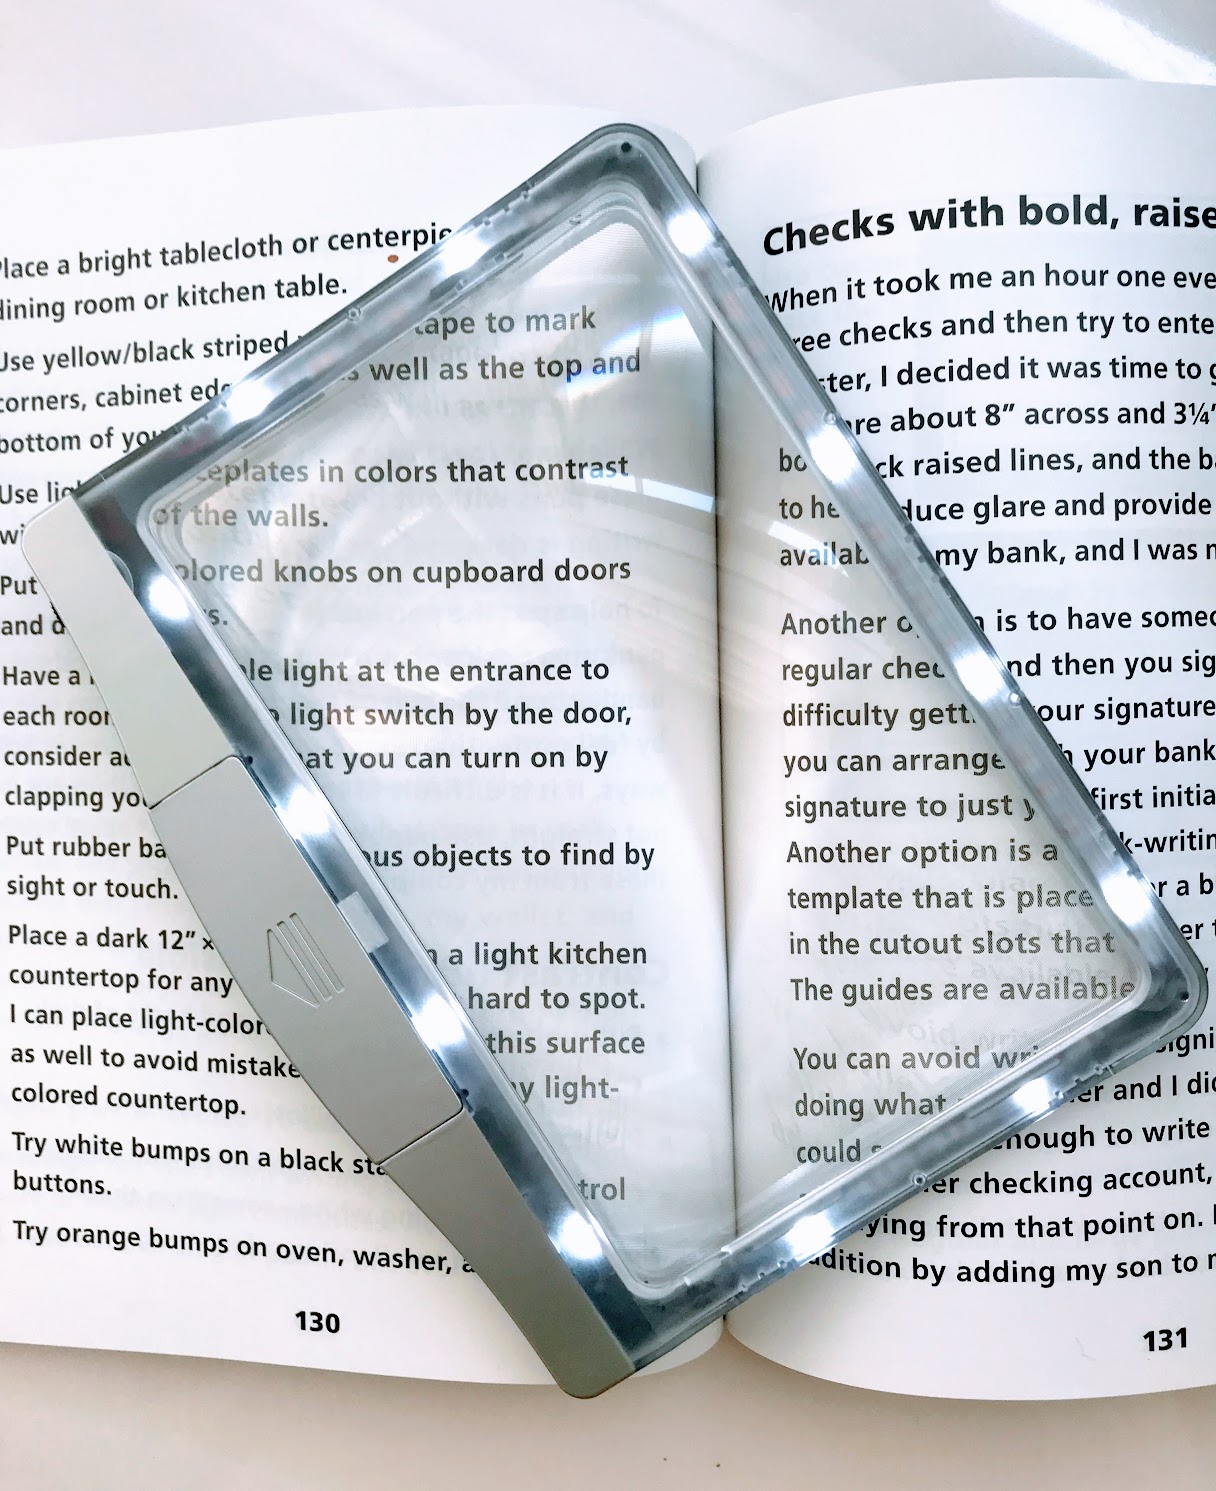 Candy AS-SEEN-ON-TV Full Page Book Magnifier and Light to See Pages 3X  Bigger